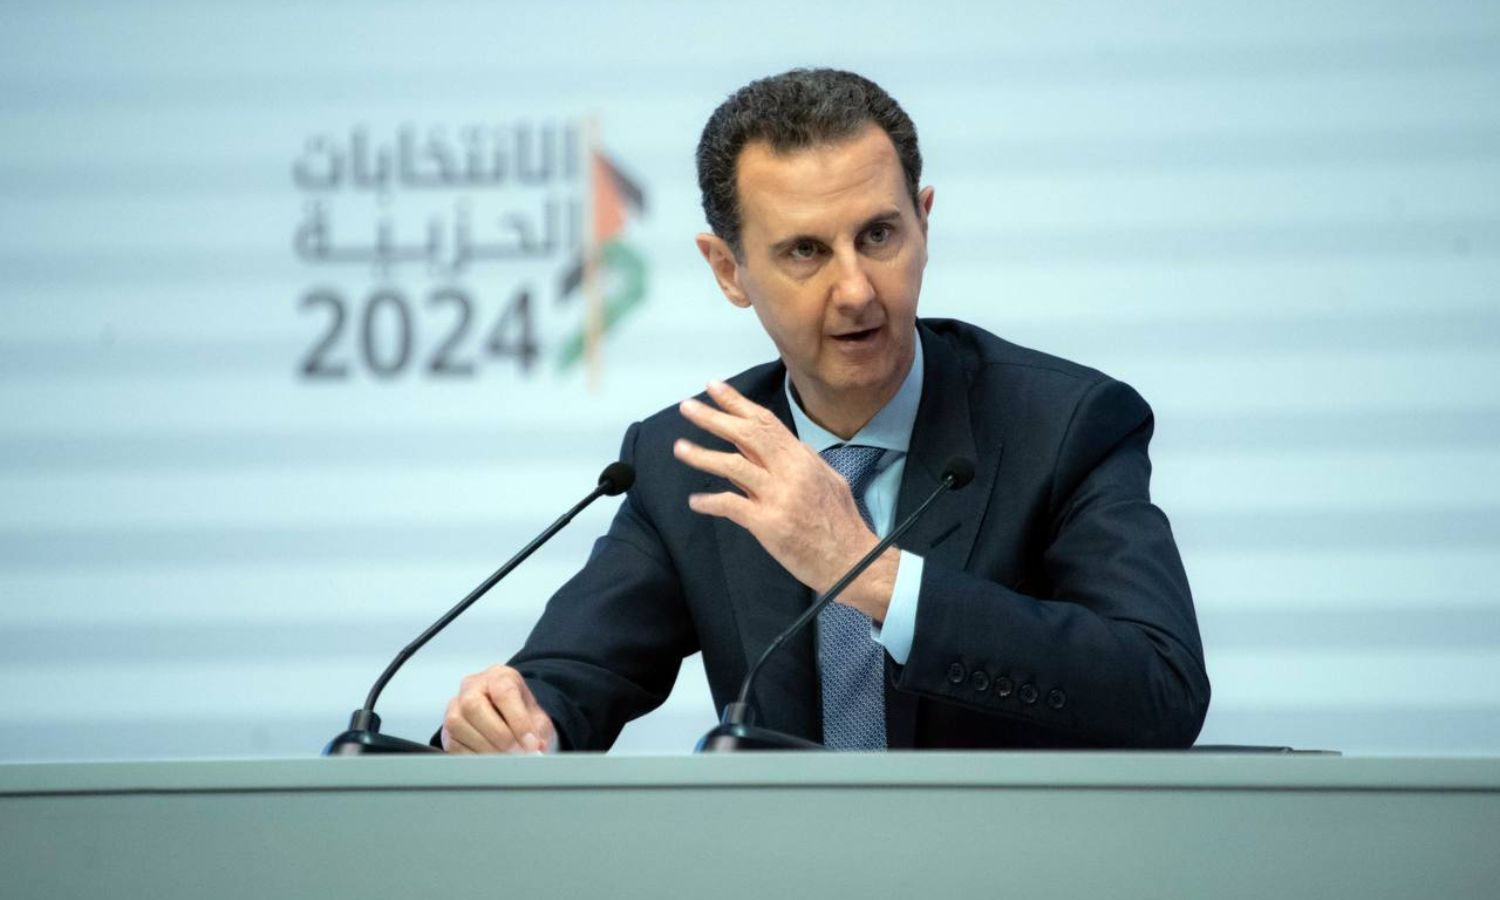 Bashar al-Assad delivers a speech at the expanded meeting of the Baath party - May 4, 2024 (Arab Socialist Baath Party/Telegram)